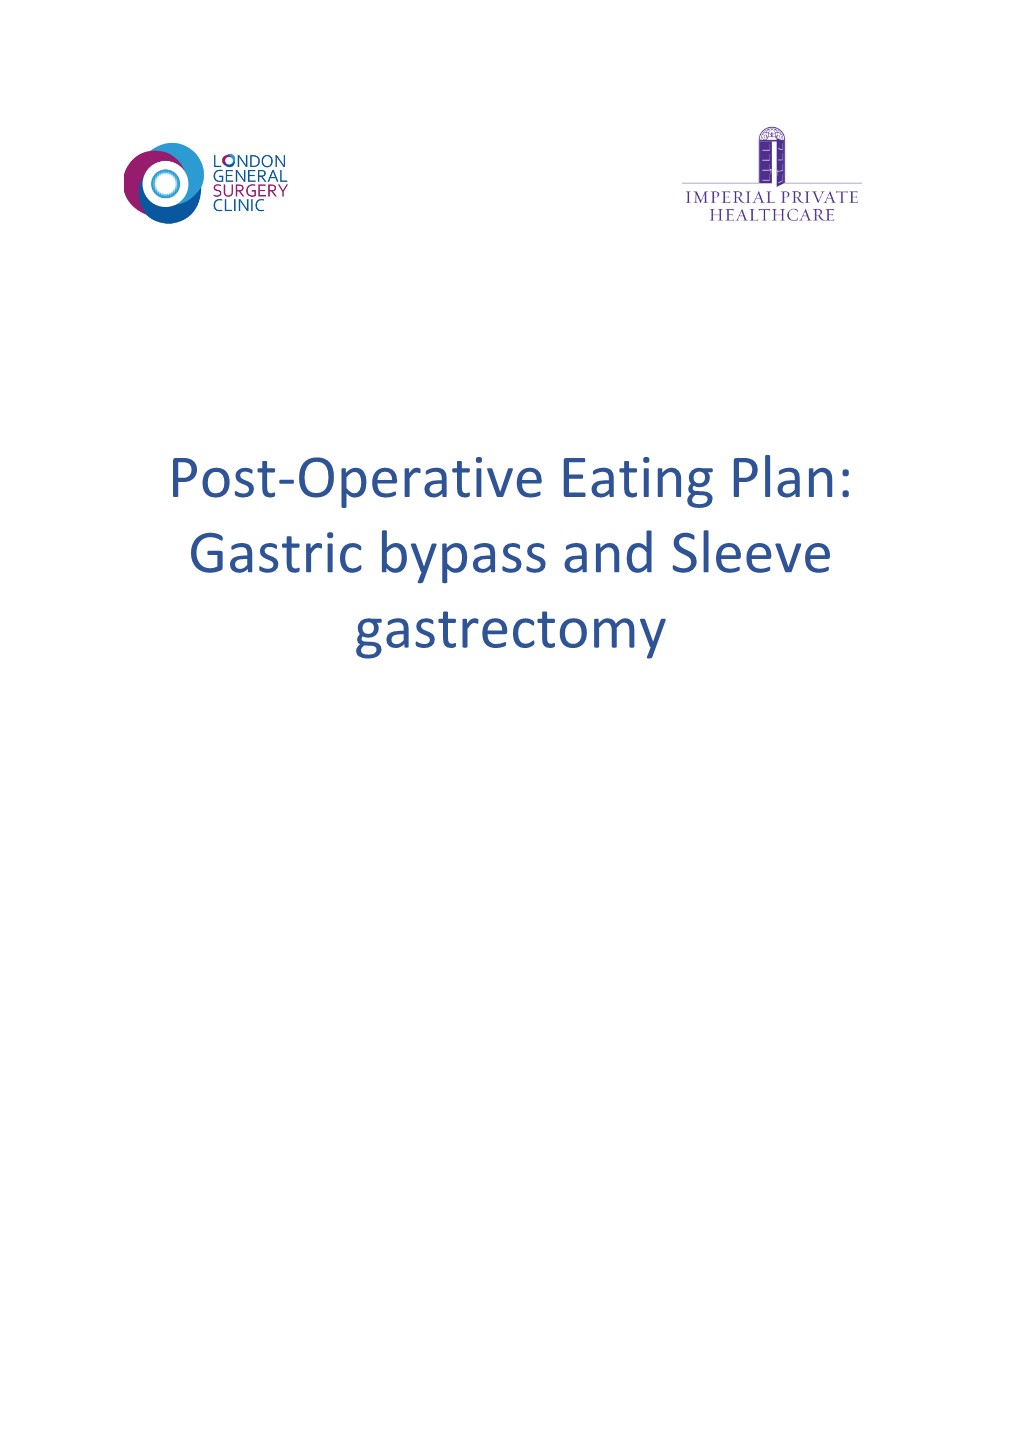 Gastric Bypass and Sleeve Gastrectomy